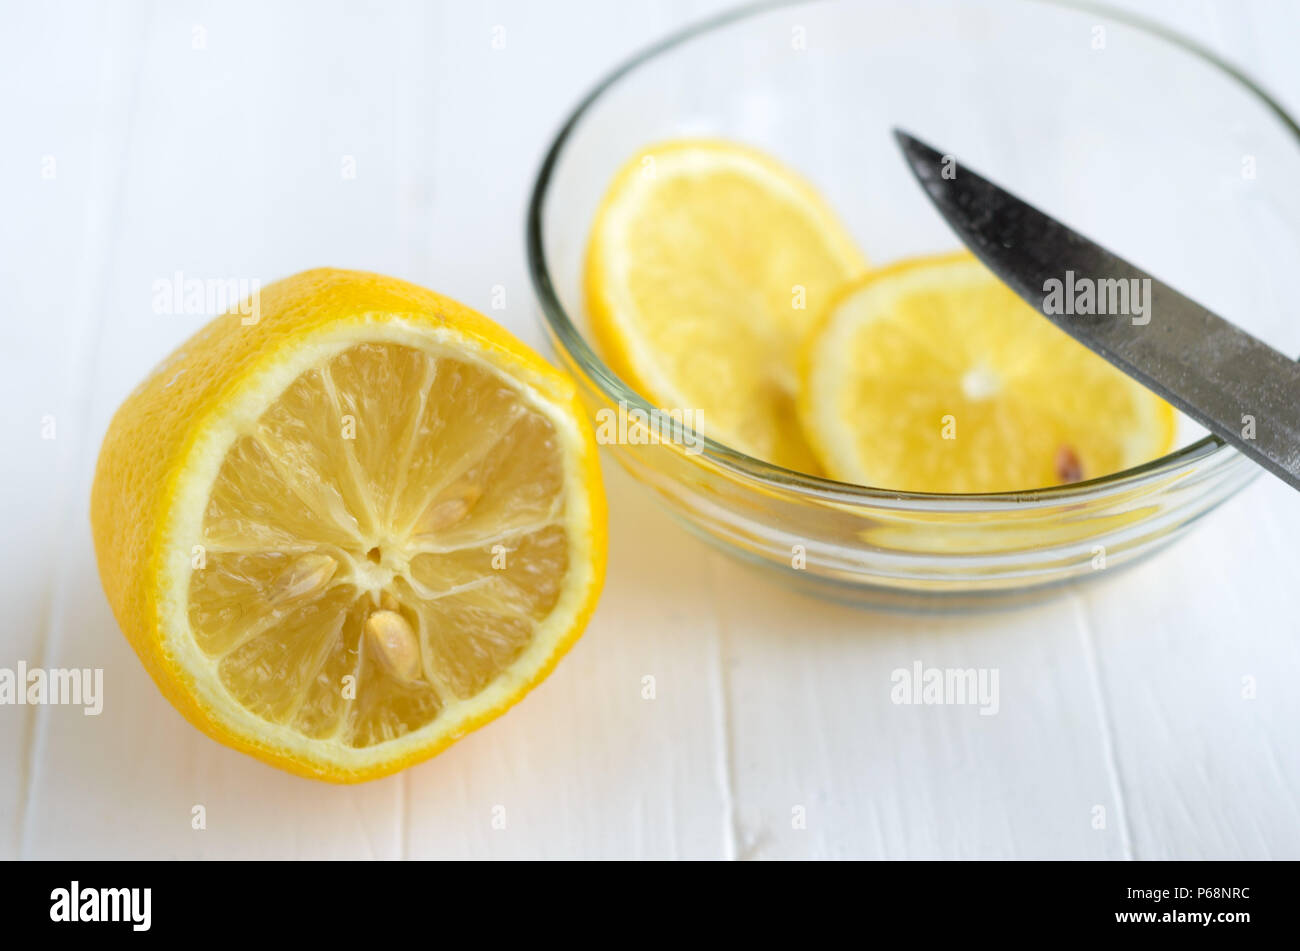 One cutted lemon and two slices of lemon into glass plate.Part of the knife blade on the glass plate. White wooden background. Stock Photo